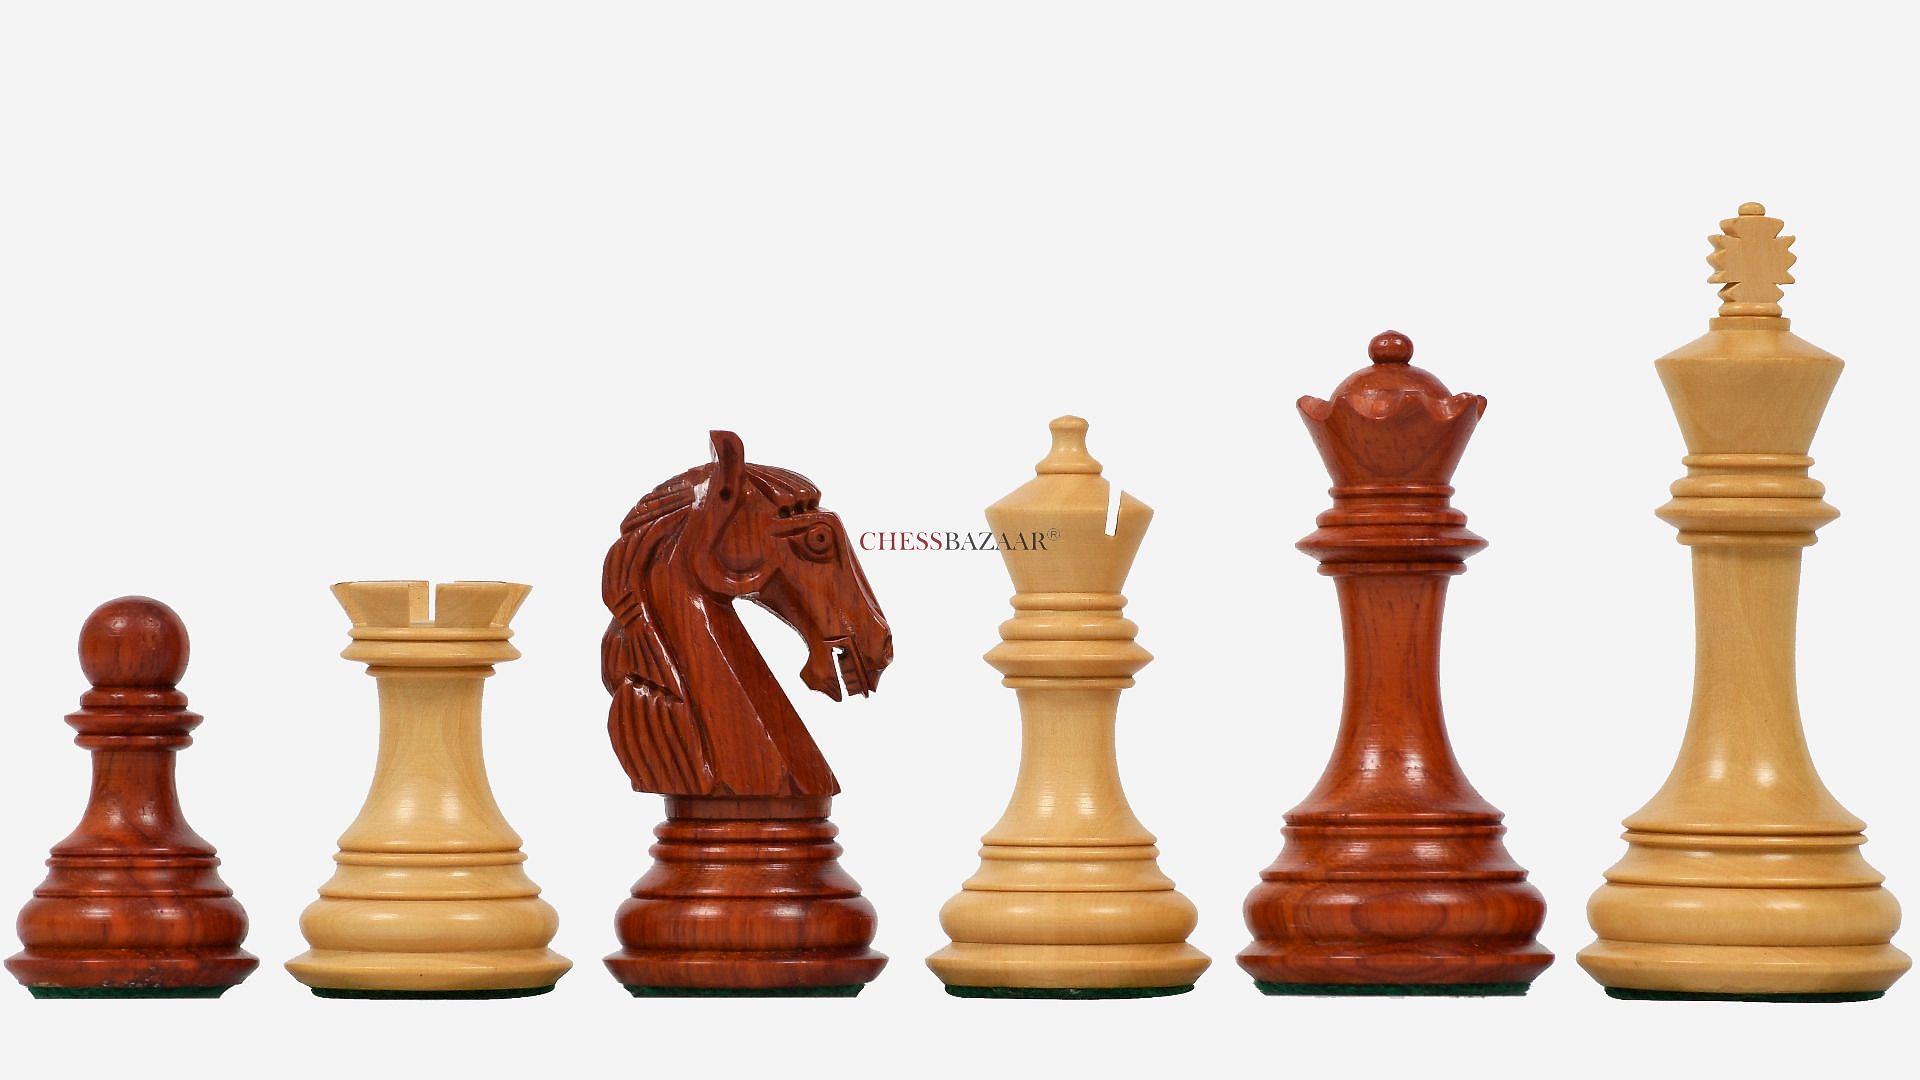 Buy The New Columbian Staunton Series Chess Pieces in Bud Rose Wood ...